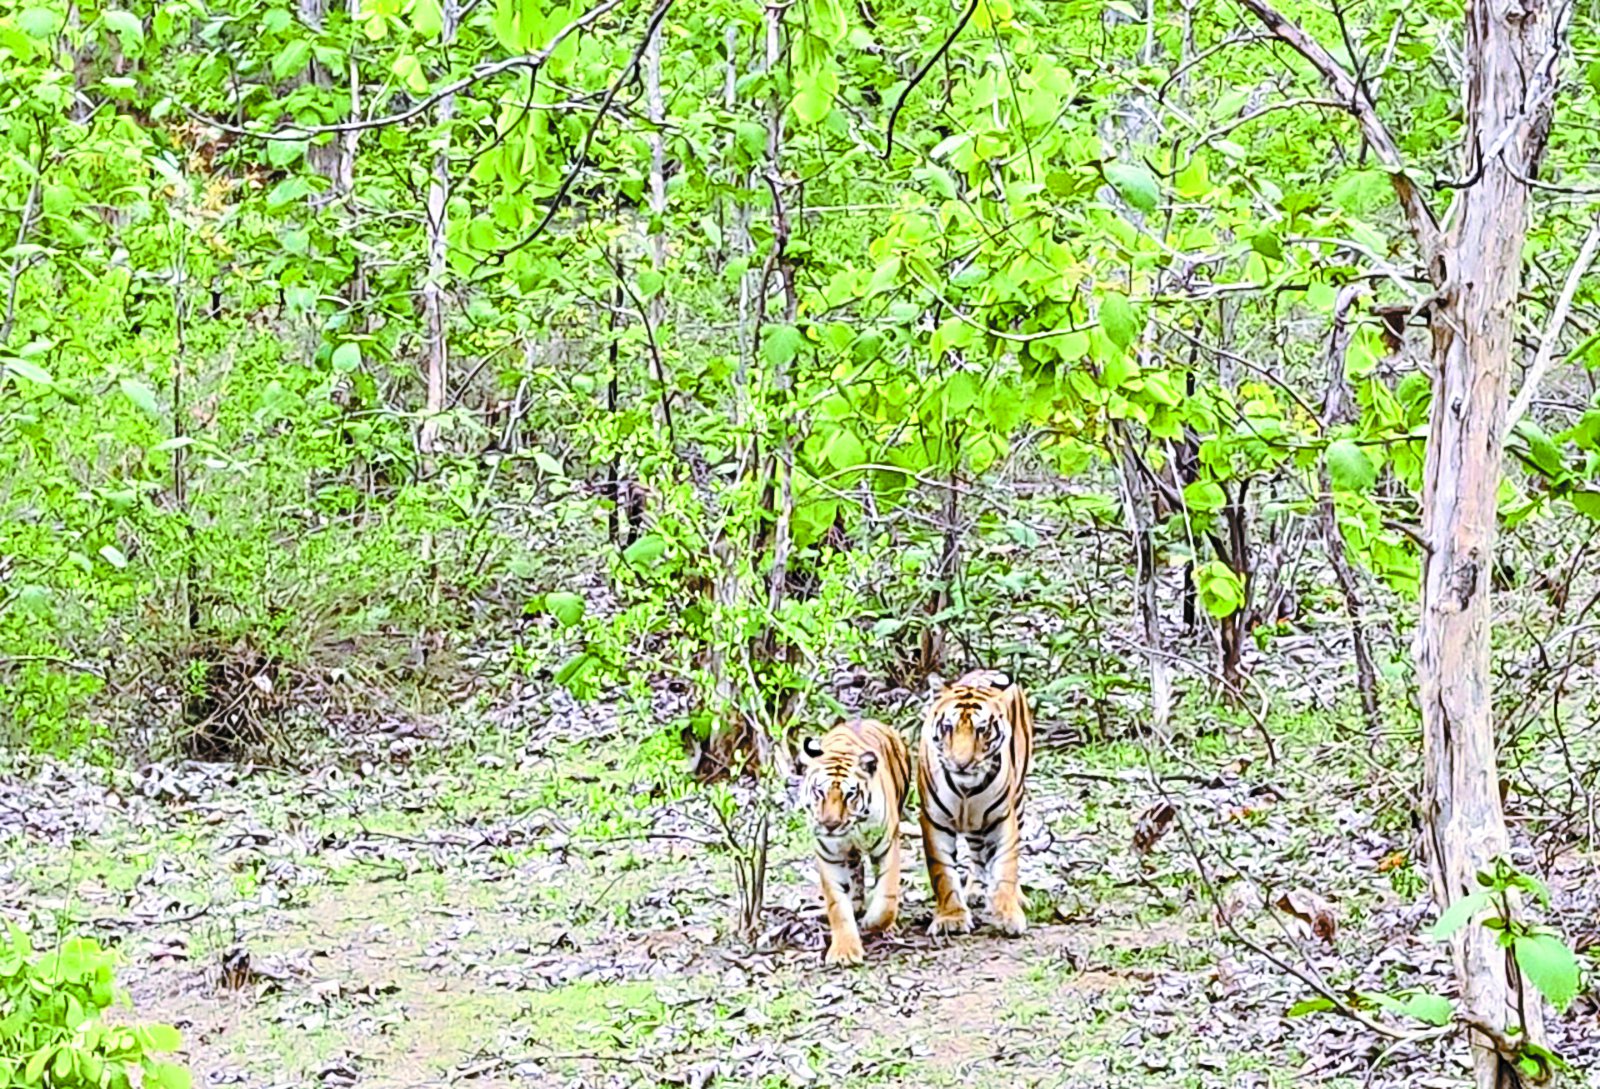 Tiger tigress trouble hazard Not checked up